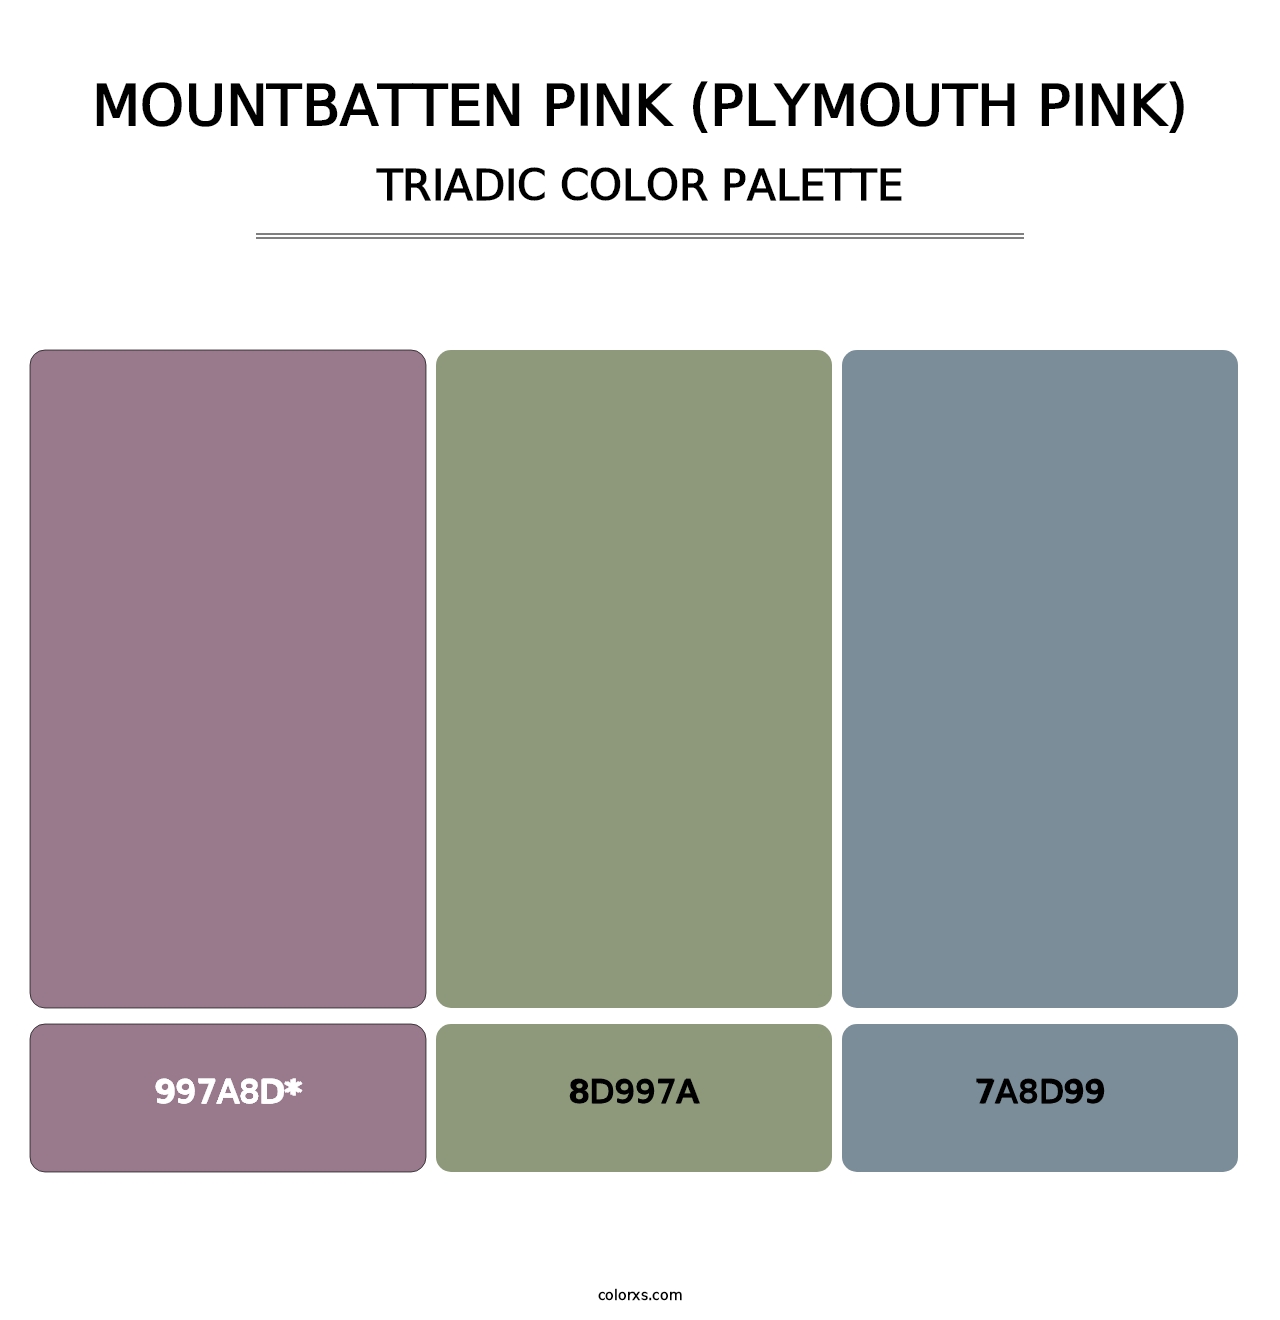 Mountbatten Pink (Plymouth Pink) - Triadic Color Palette